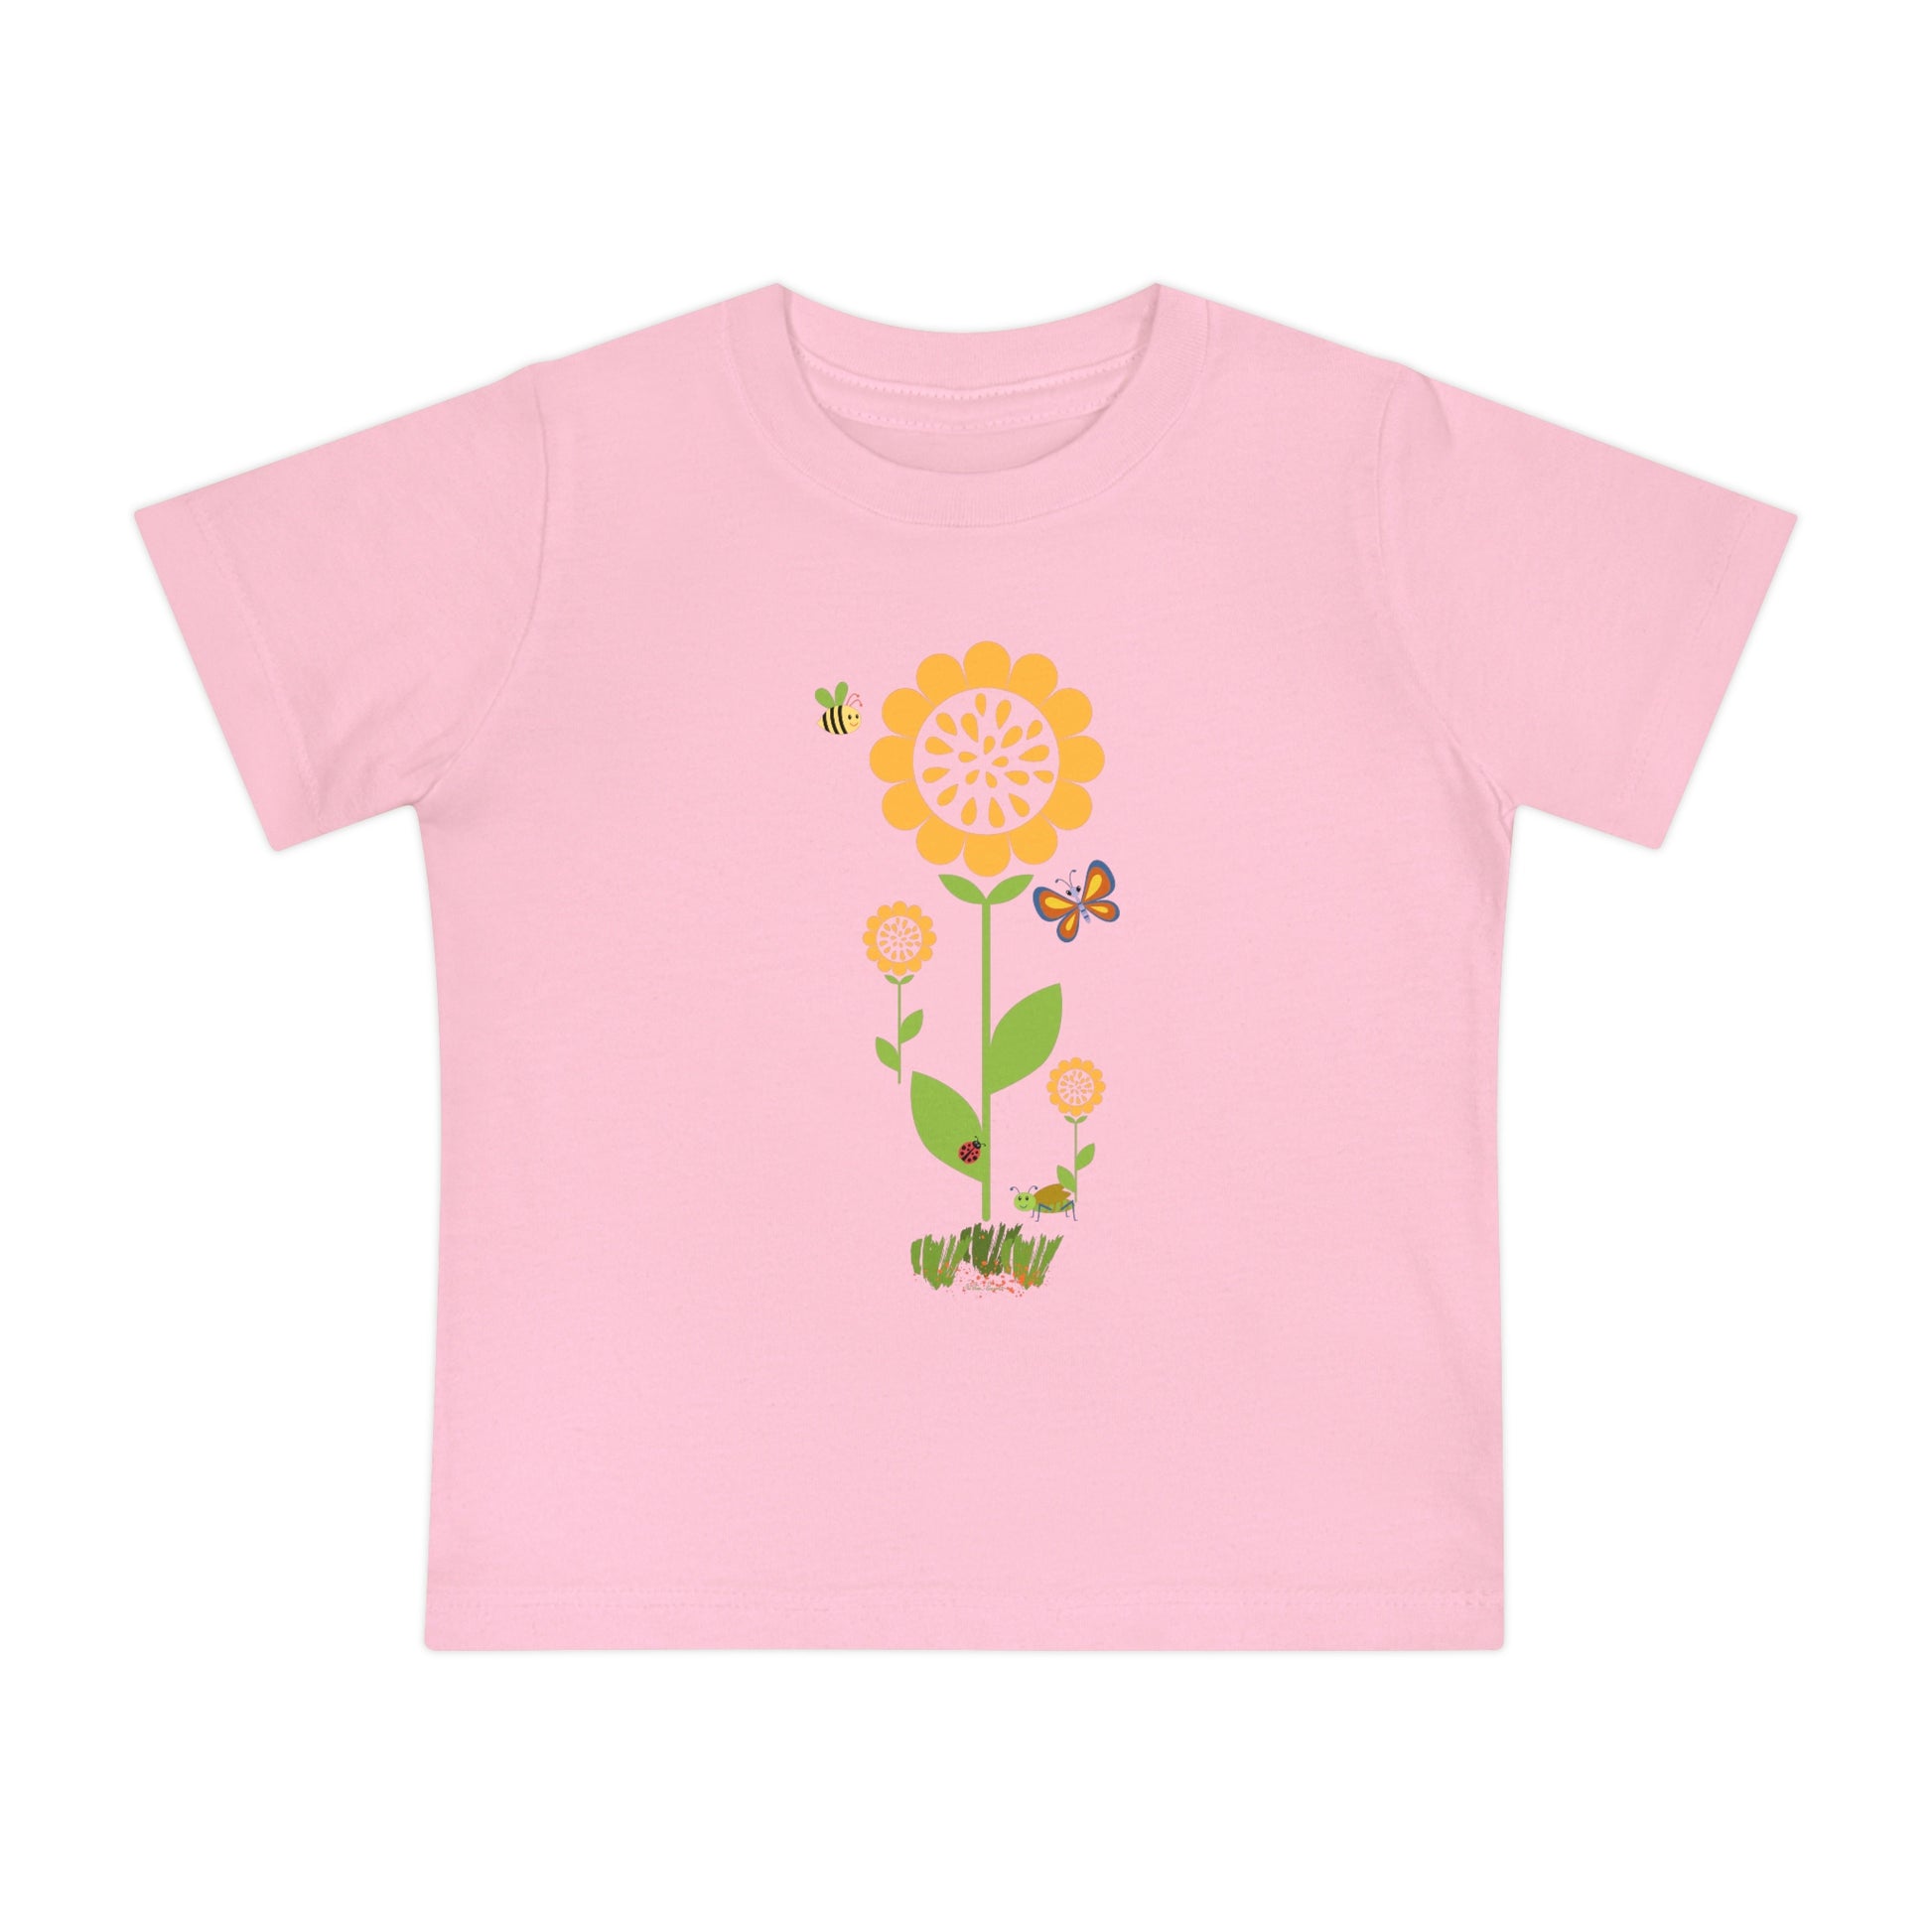 Flat front view of the Pink t-shirt